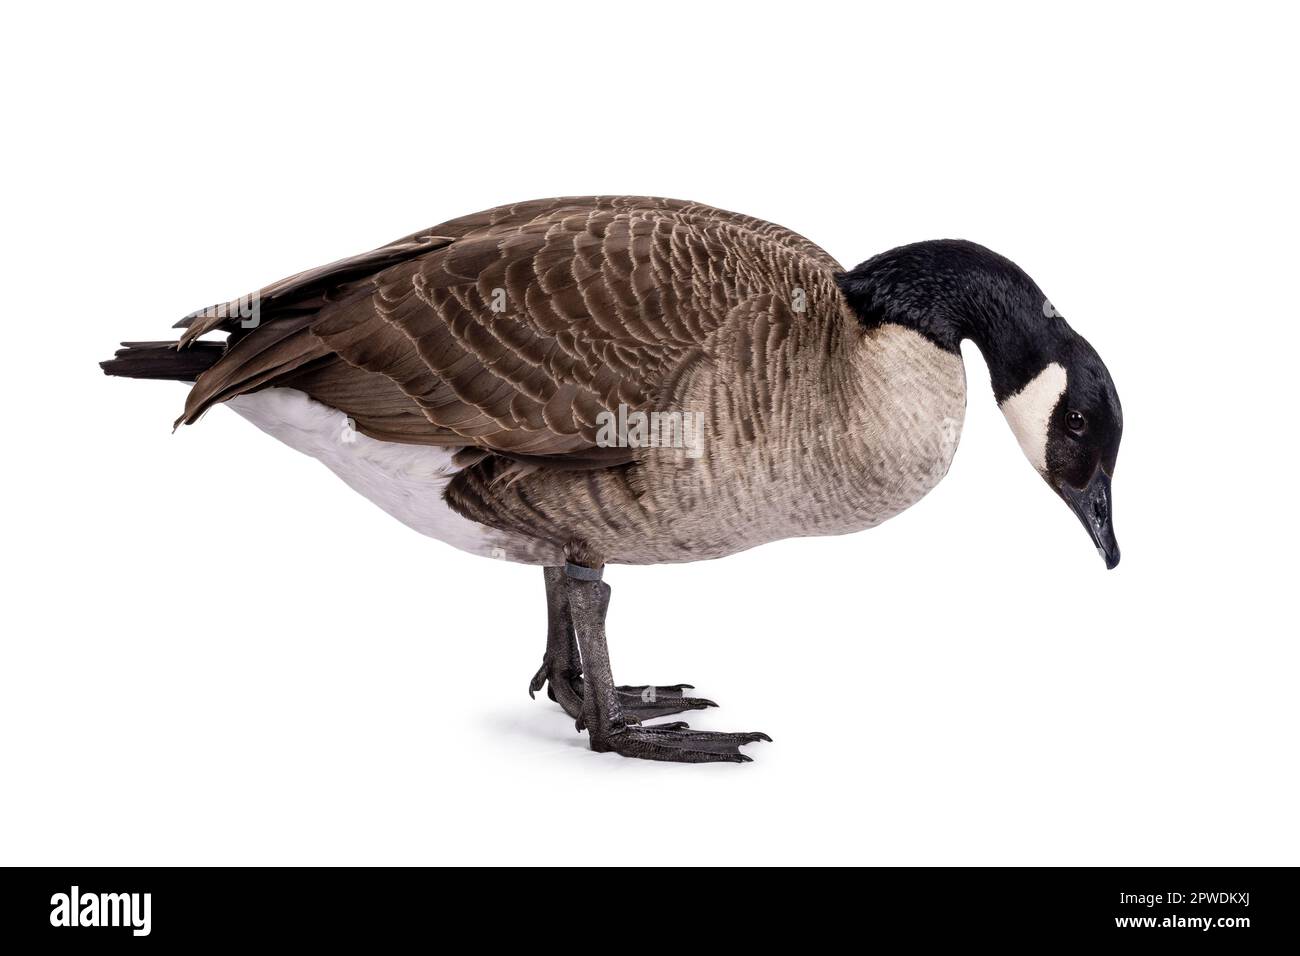 Small Canadian Goose, standing side ways. Head bowed down towards ground. Isolated on a white background. Stock Photo